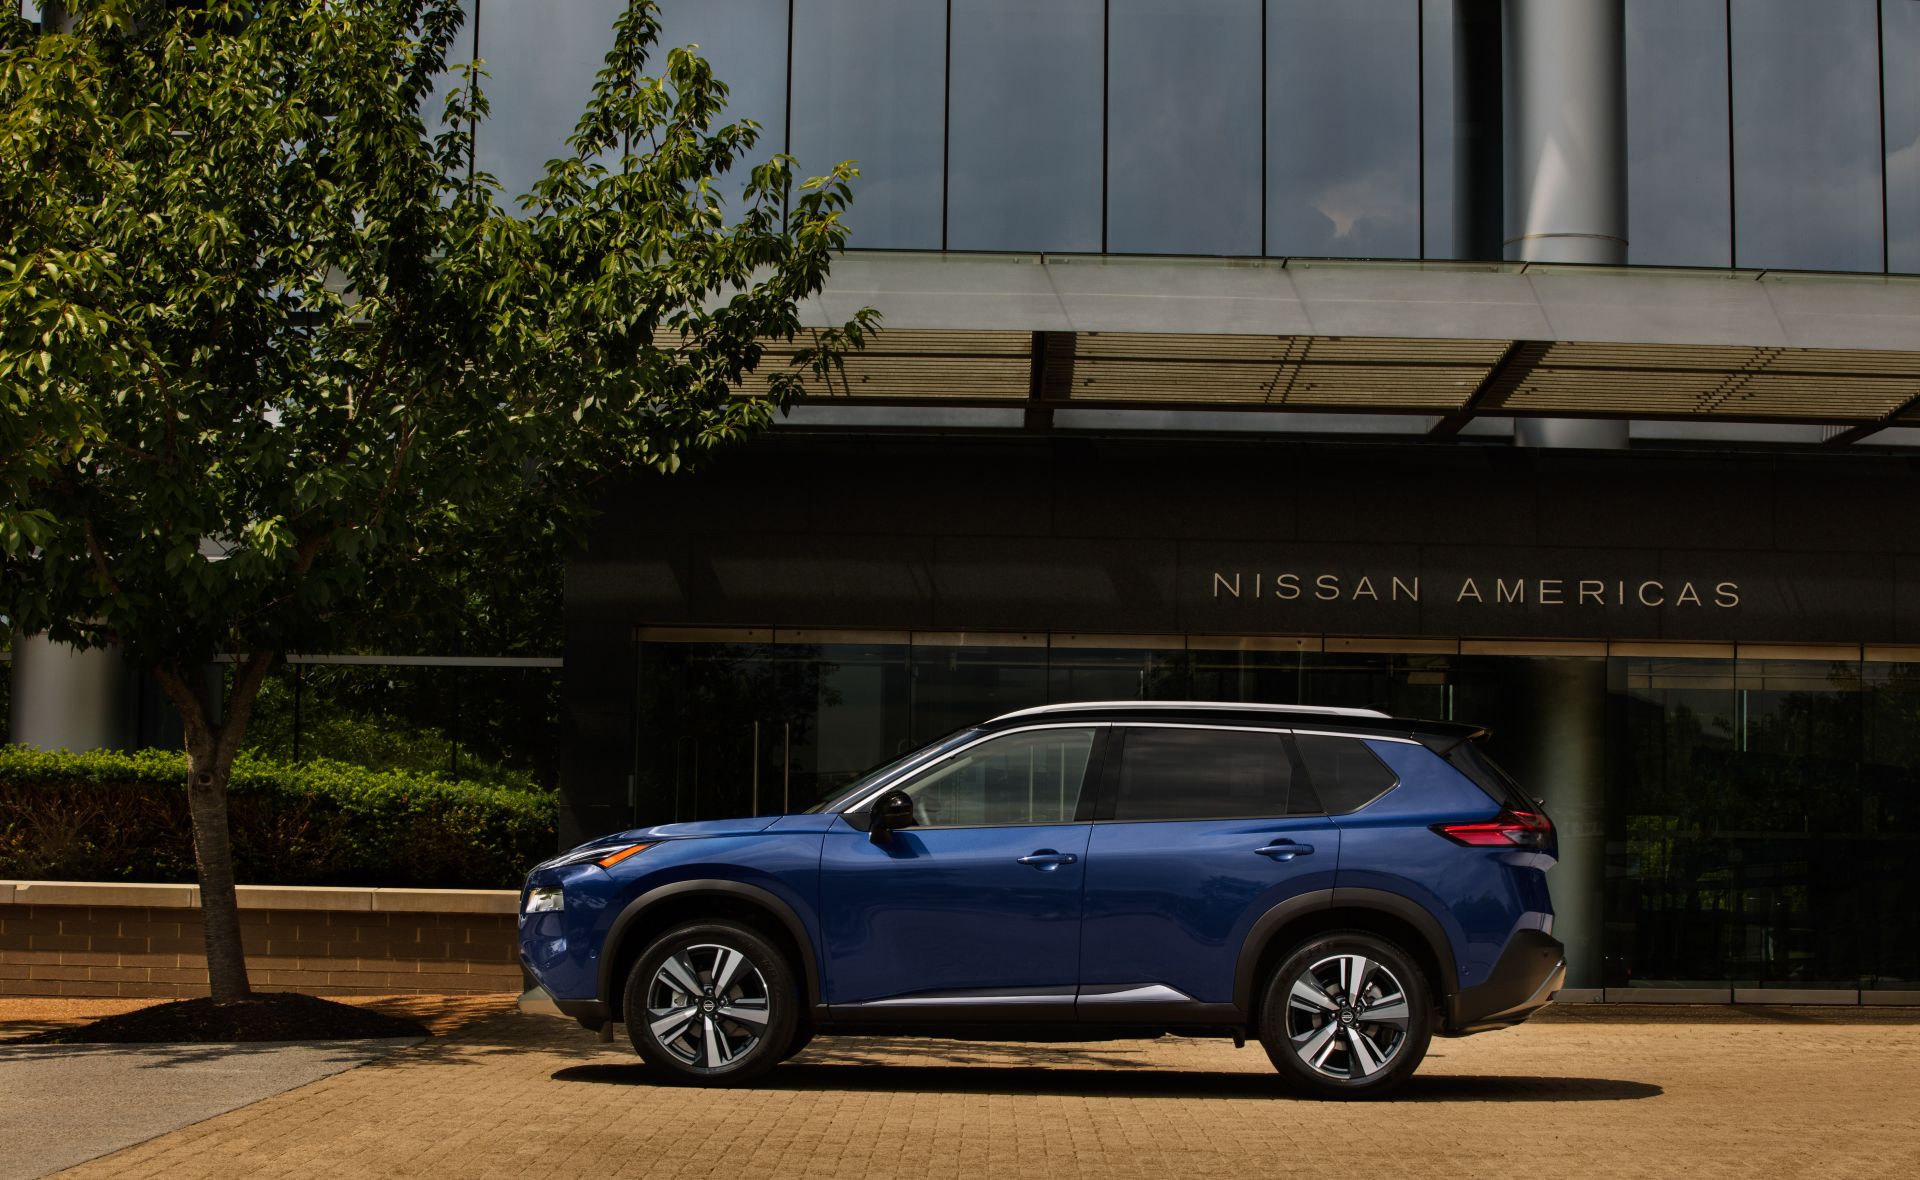 2021 Nissan Rogue Enters Production In Tennessee, Will ...